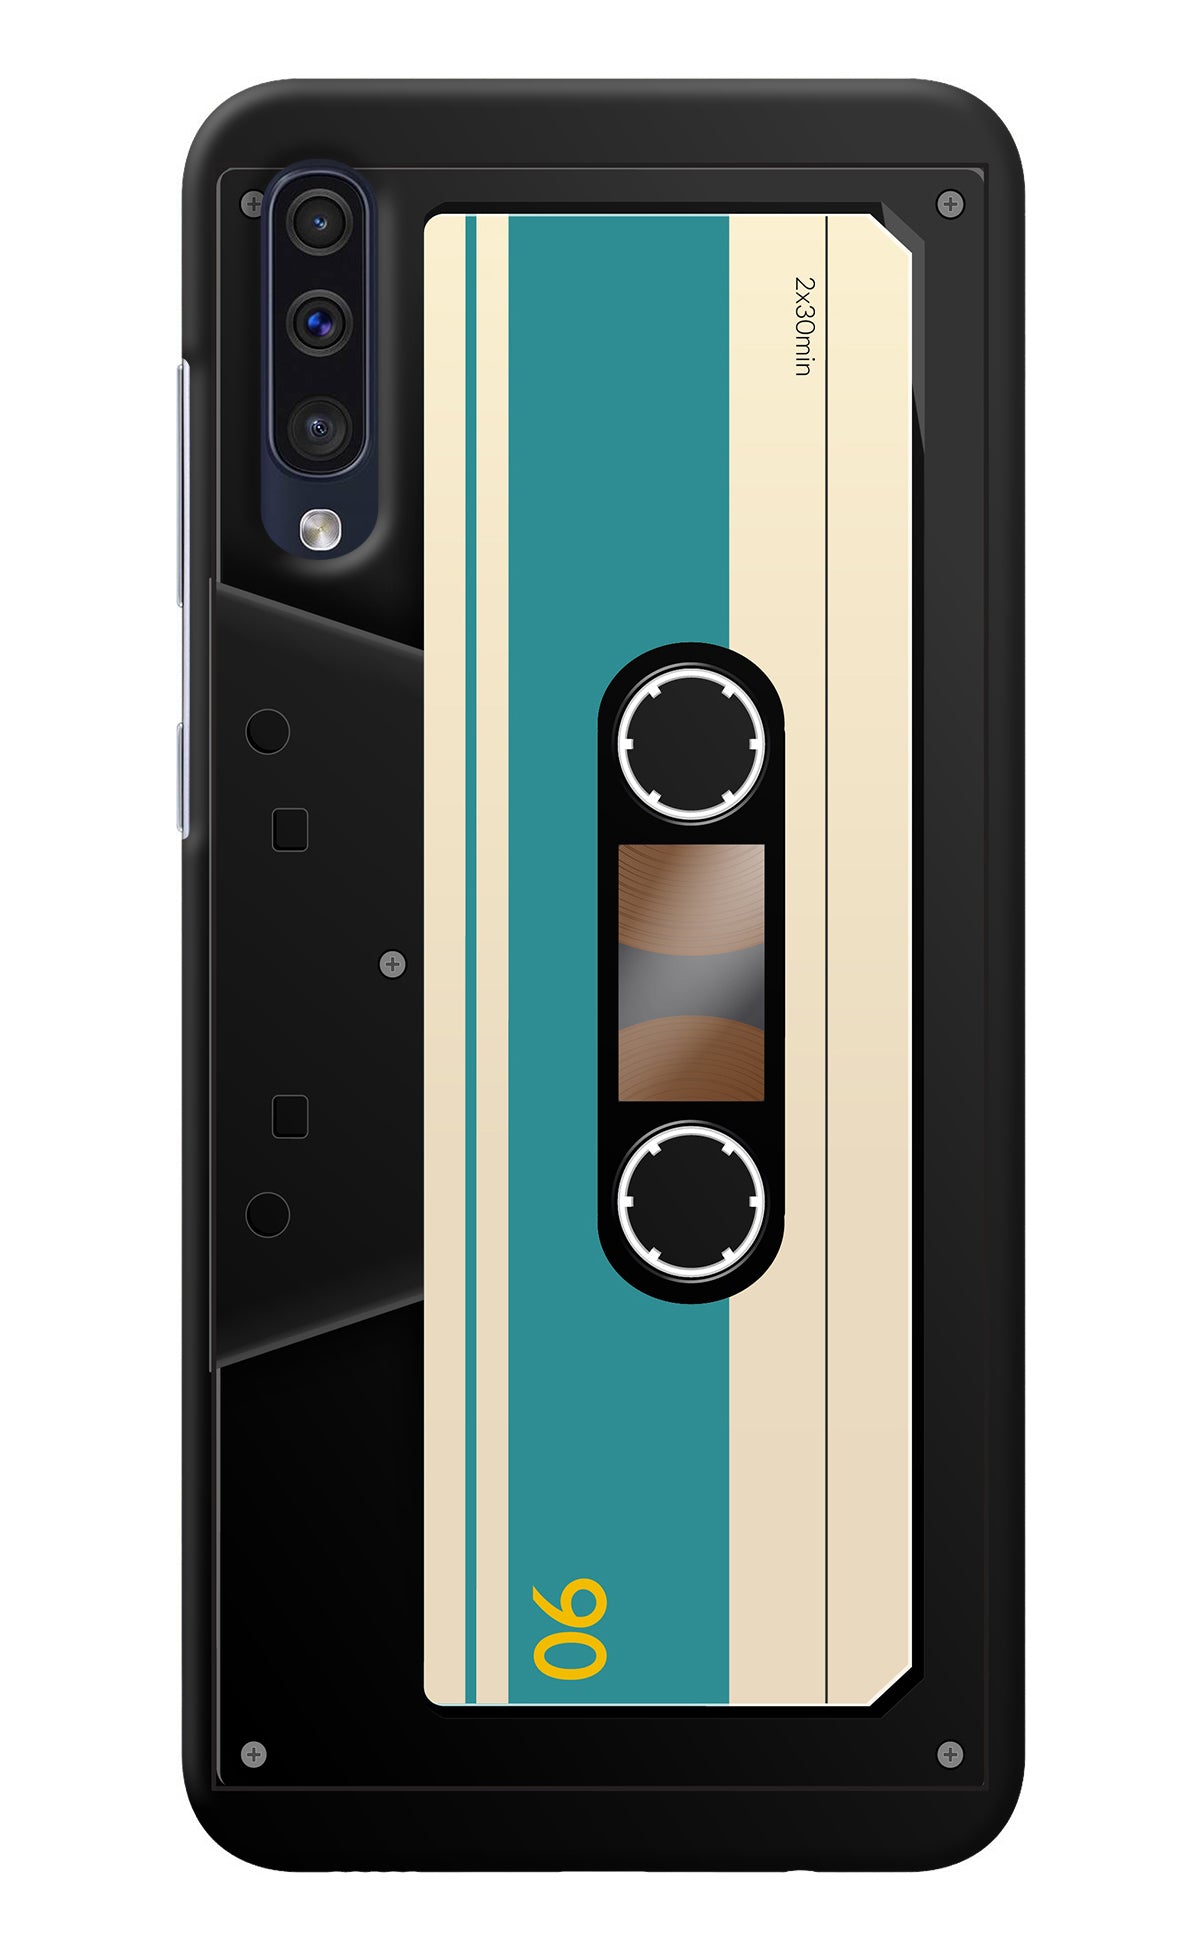 Cassette Samsung A50/A50s/A30s Back Cover